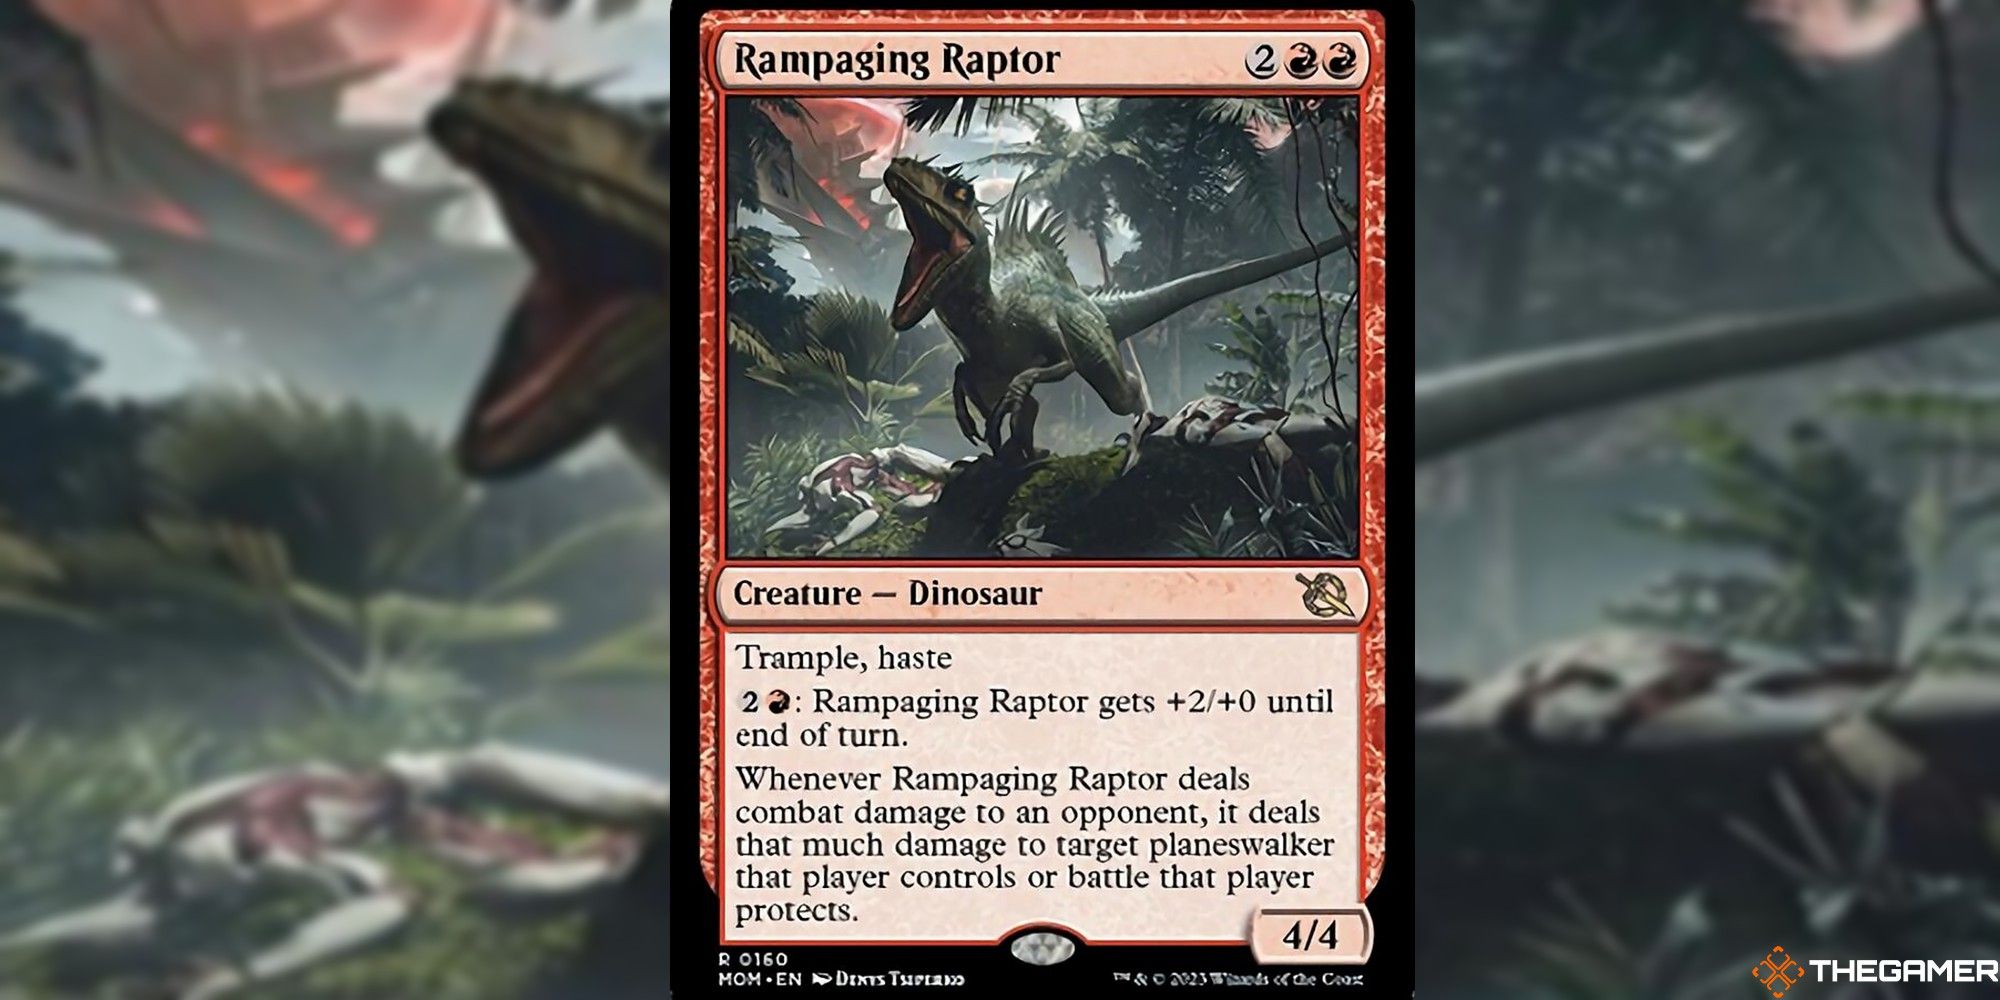 Raptor rampage card and art background from Magic the Gathering.